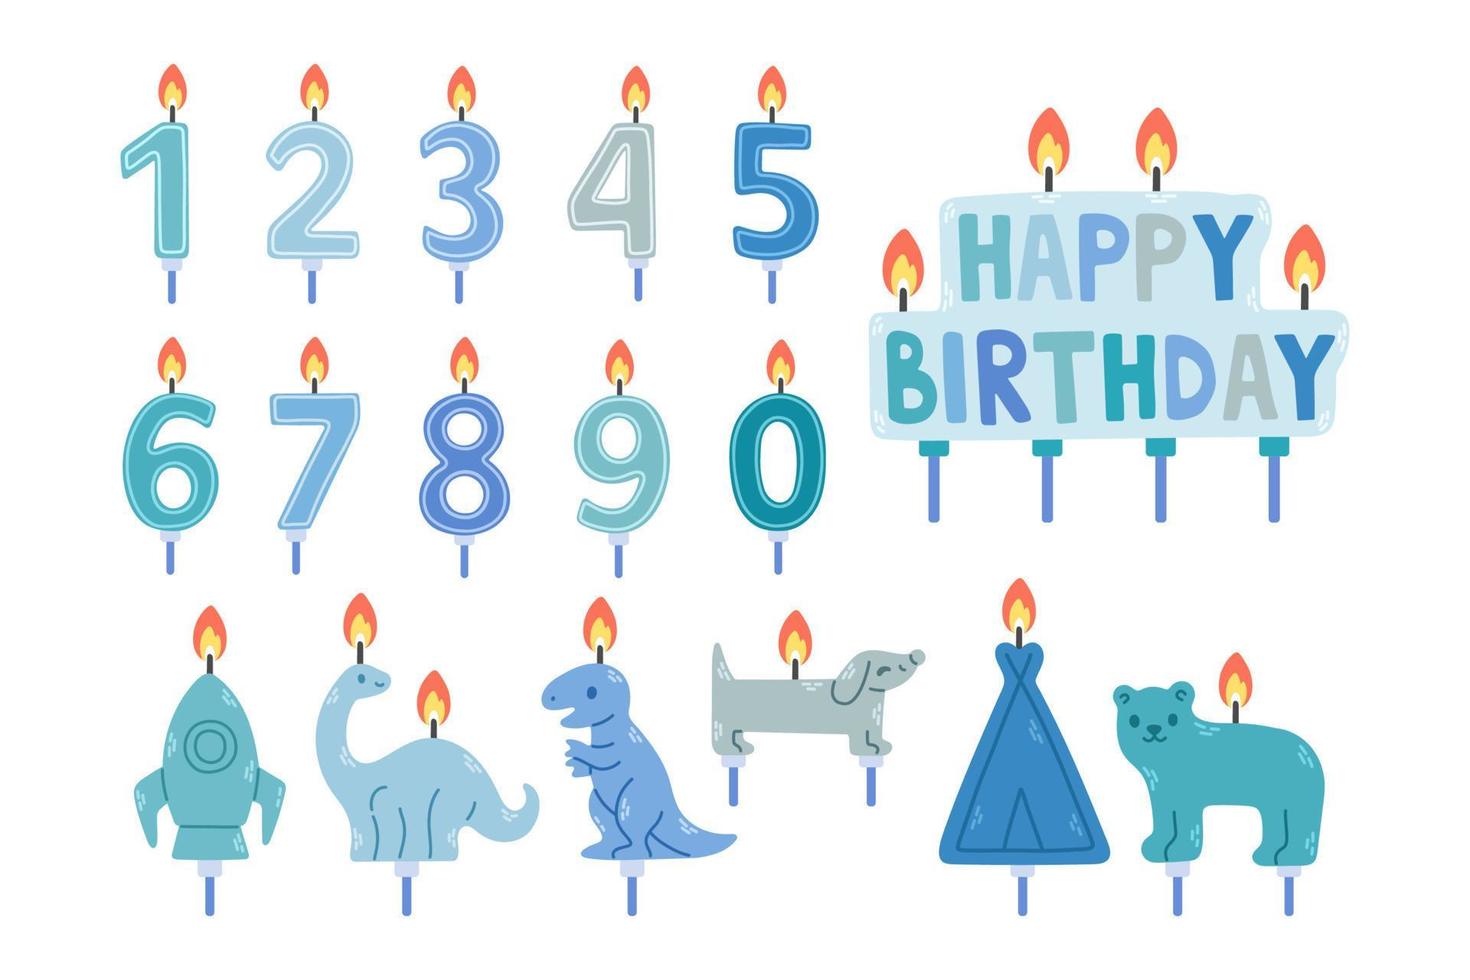 Boy birthday candles set in blue colors, number candles, different shapes, isolated on white, EPS10 vector illustration